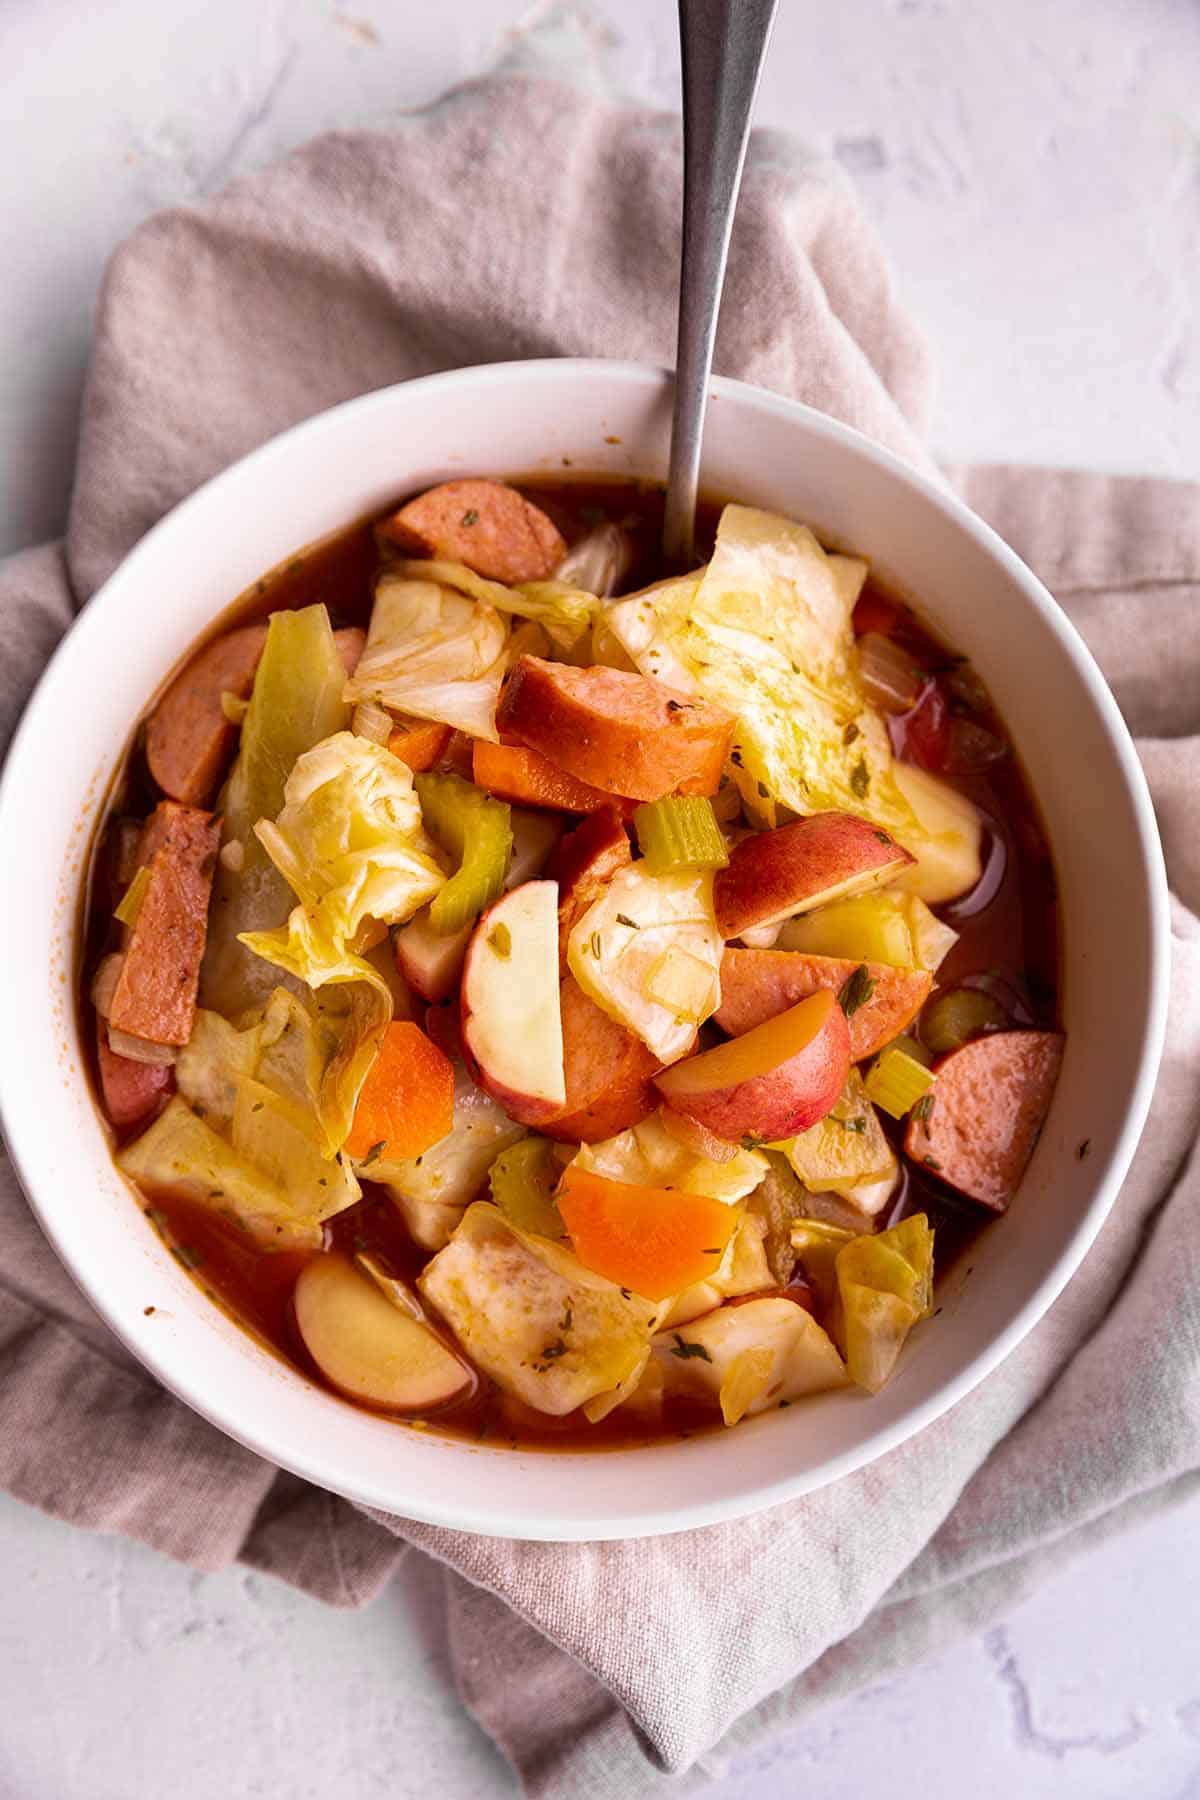 A bowl of cabbage soup with potatoes and sausage.